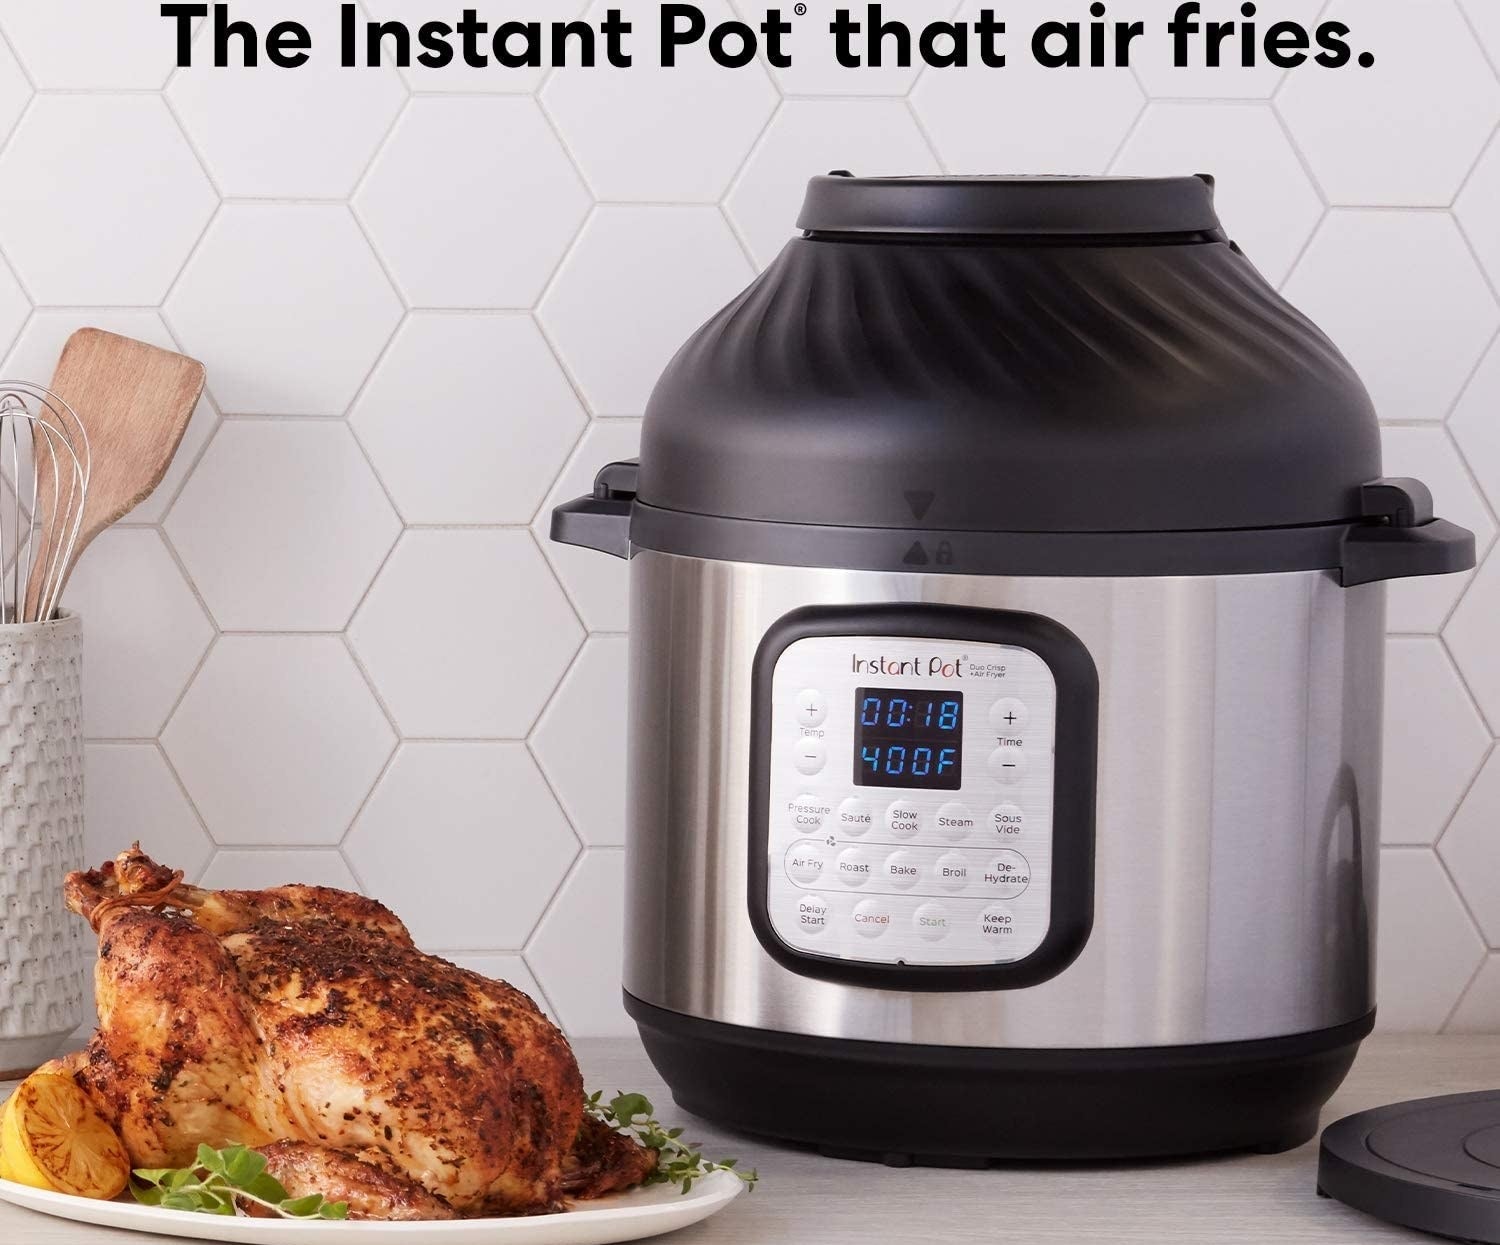 Silver and black instant pot with control panel next to a cooked chicken